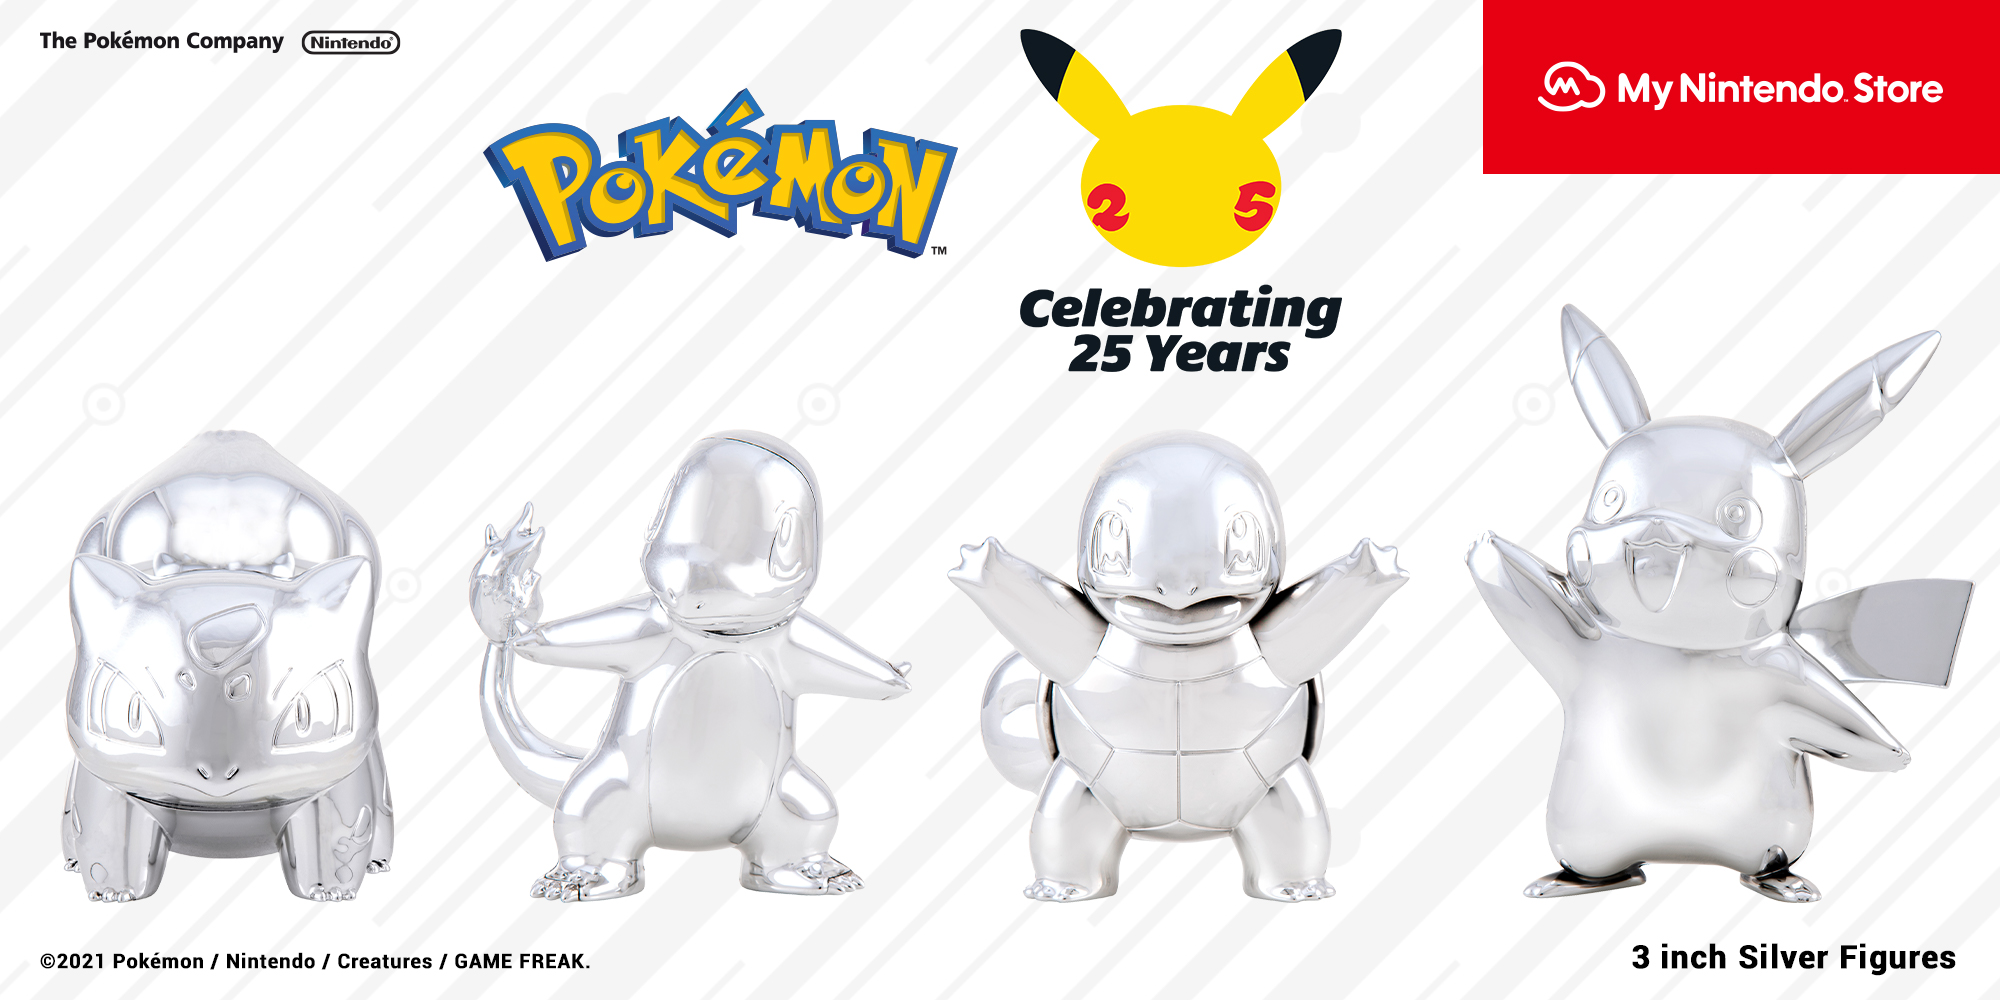 Nintendo Uk These Special Edition Pokemon25 Silver Figures Are Available Now On My Nintendo Store T Co Qtffjomy43 T Co V1mlpwc8h2 Twitter